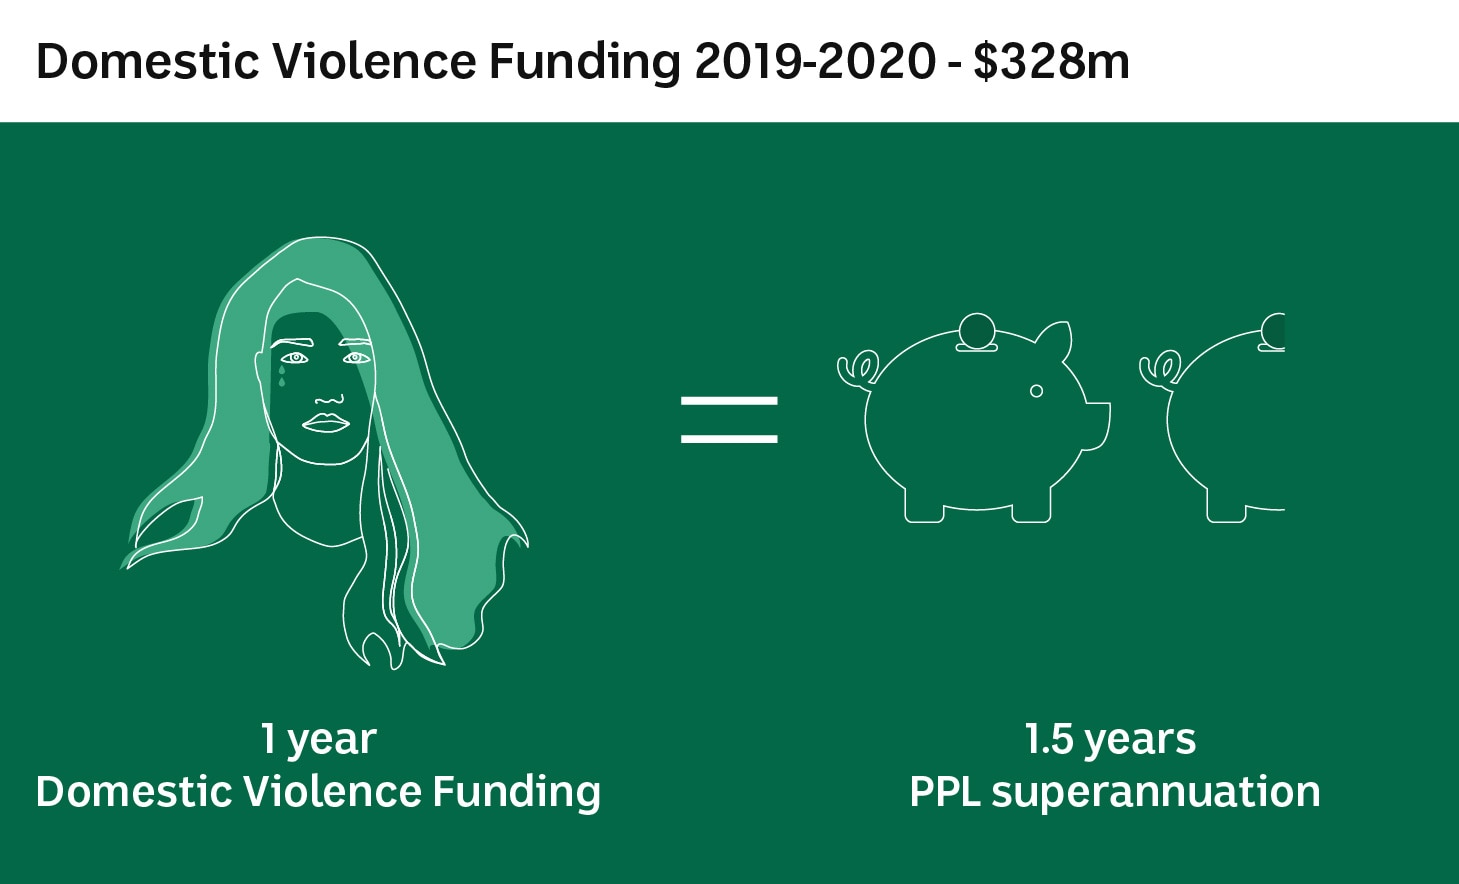 Illustration of a woman crying comparing the funding for domestic violence to piggy banks representing superannuation.